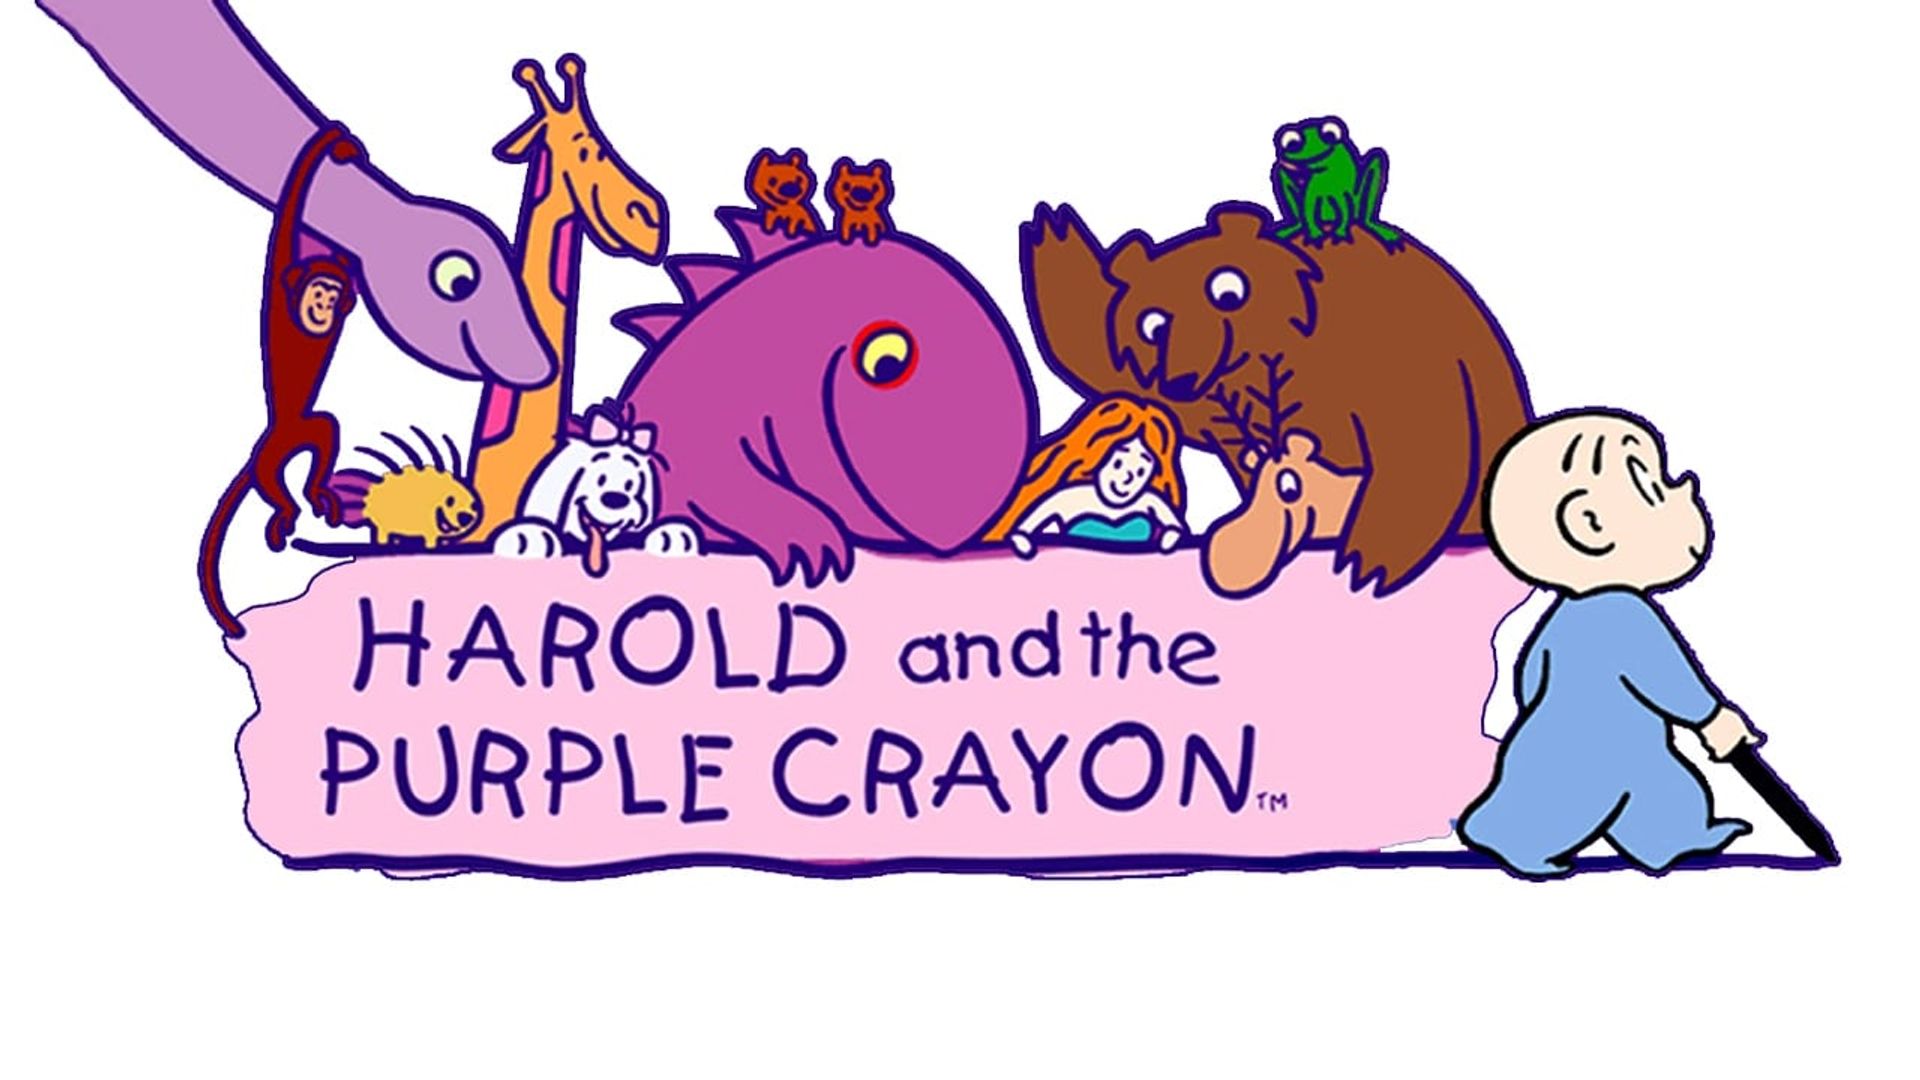 Harold and the Purple Crayon background